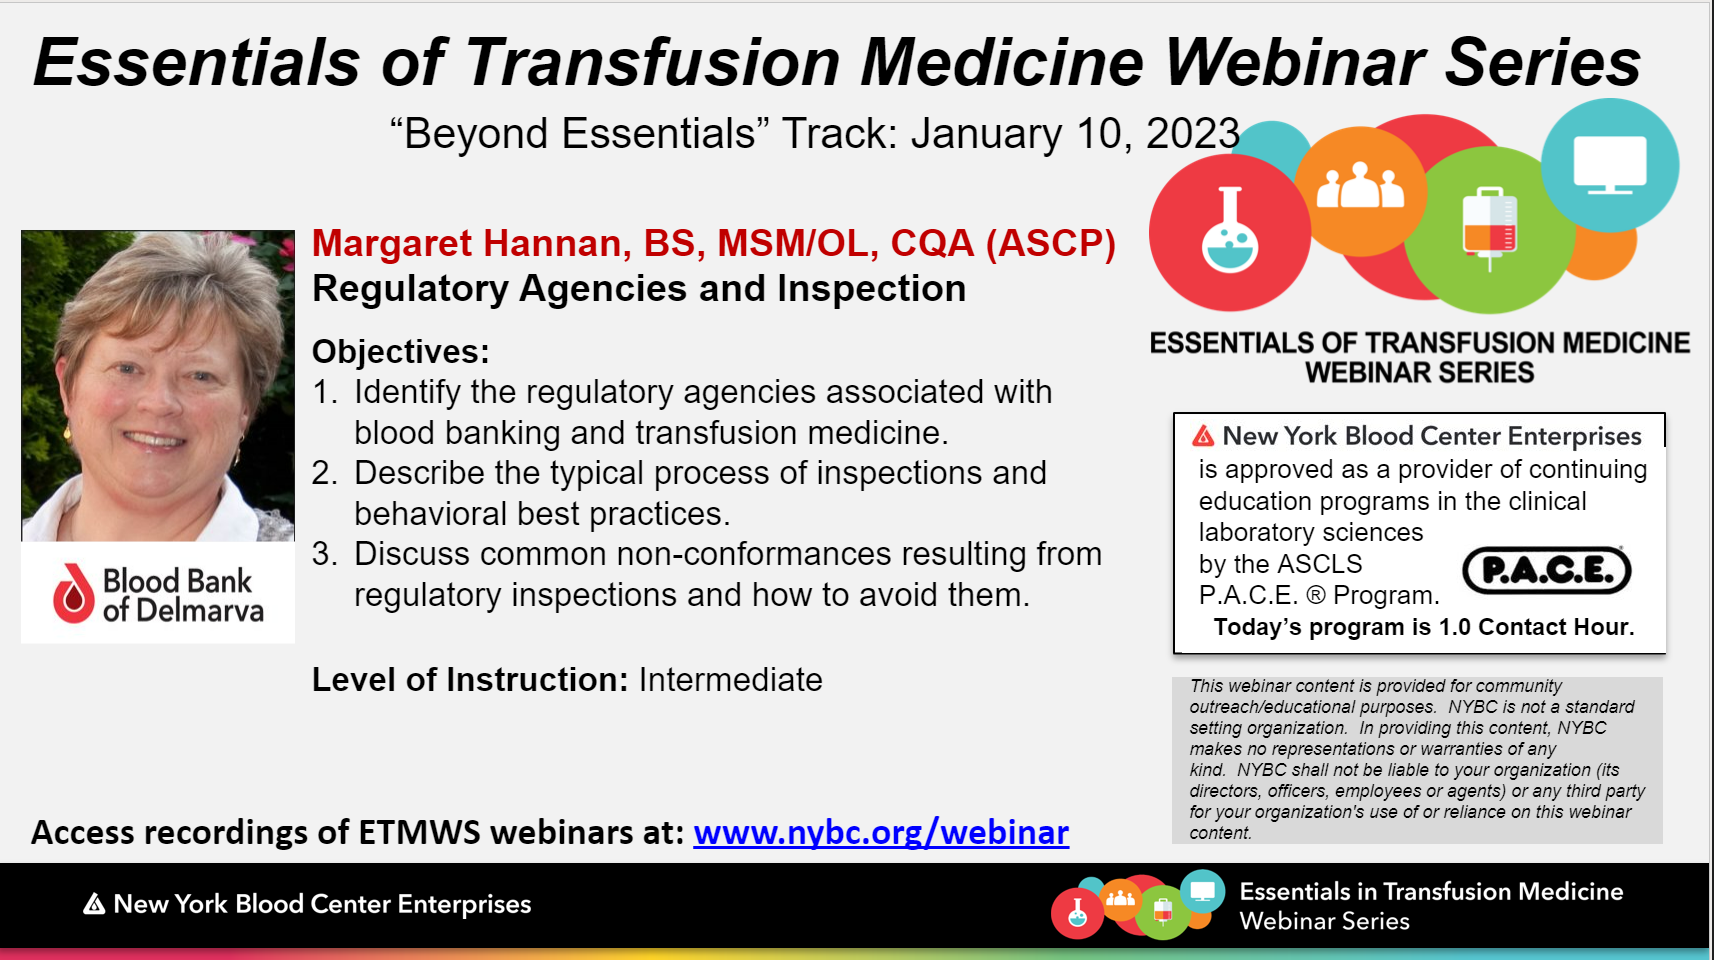 Slide of Essentials of Transfusion Medicine Webinar Series, Beyond Essentials Track: Regulatory Agencies and Inspection, presented by Margaret Hannan on January 10, 2023. 